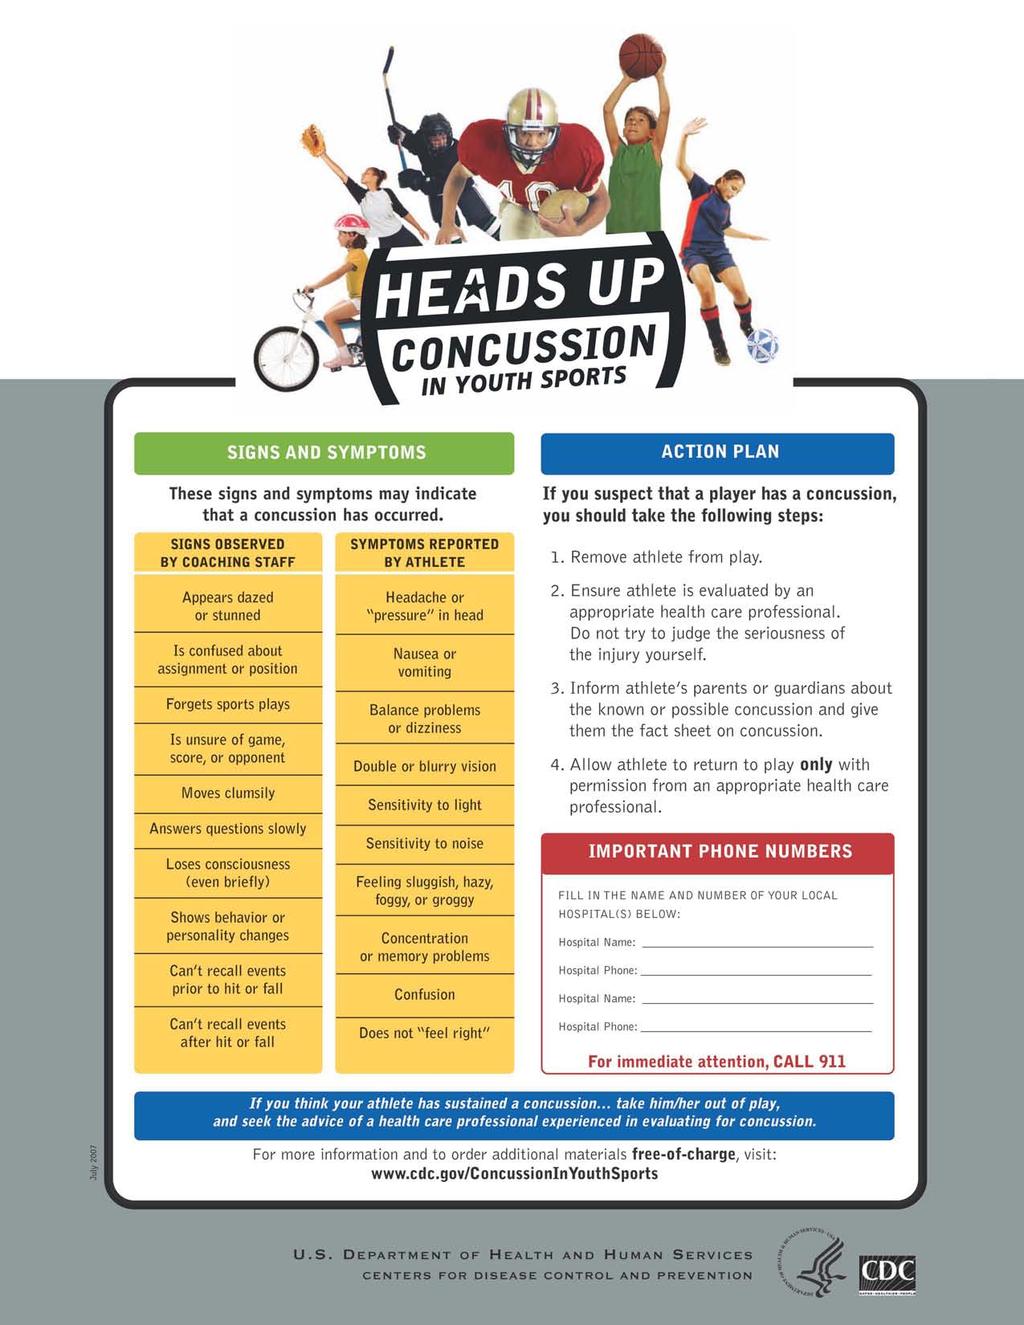 o ~ SIGNS AND SYMPTOMS These signs and symptoms may indicate that a concussion has occurred.